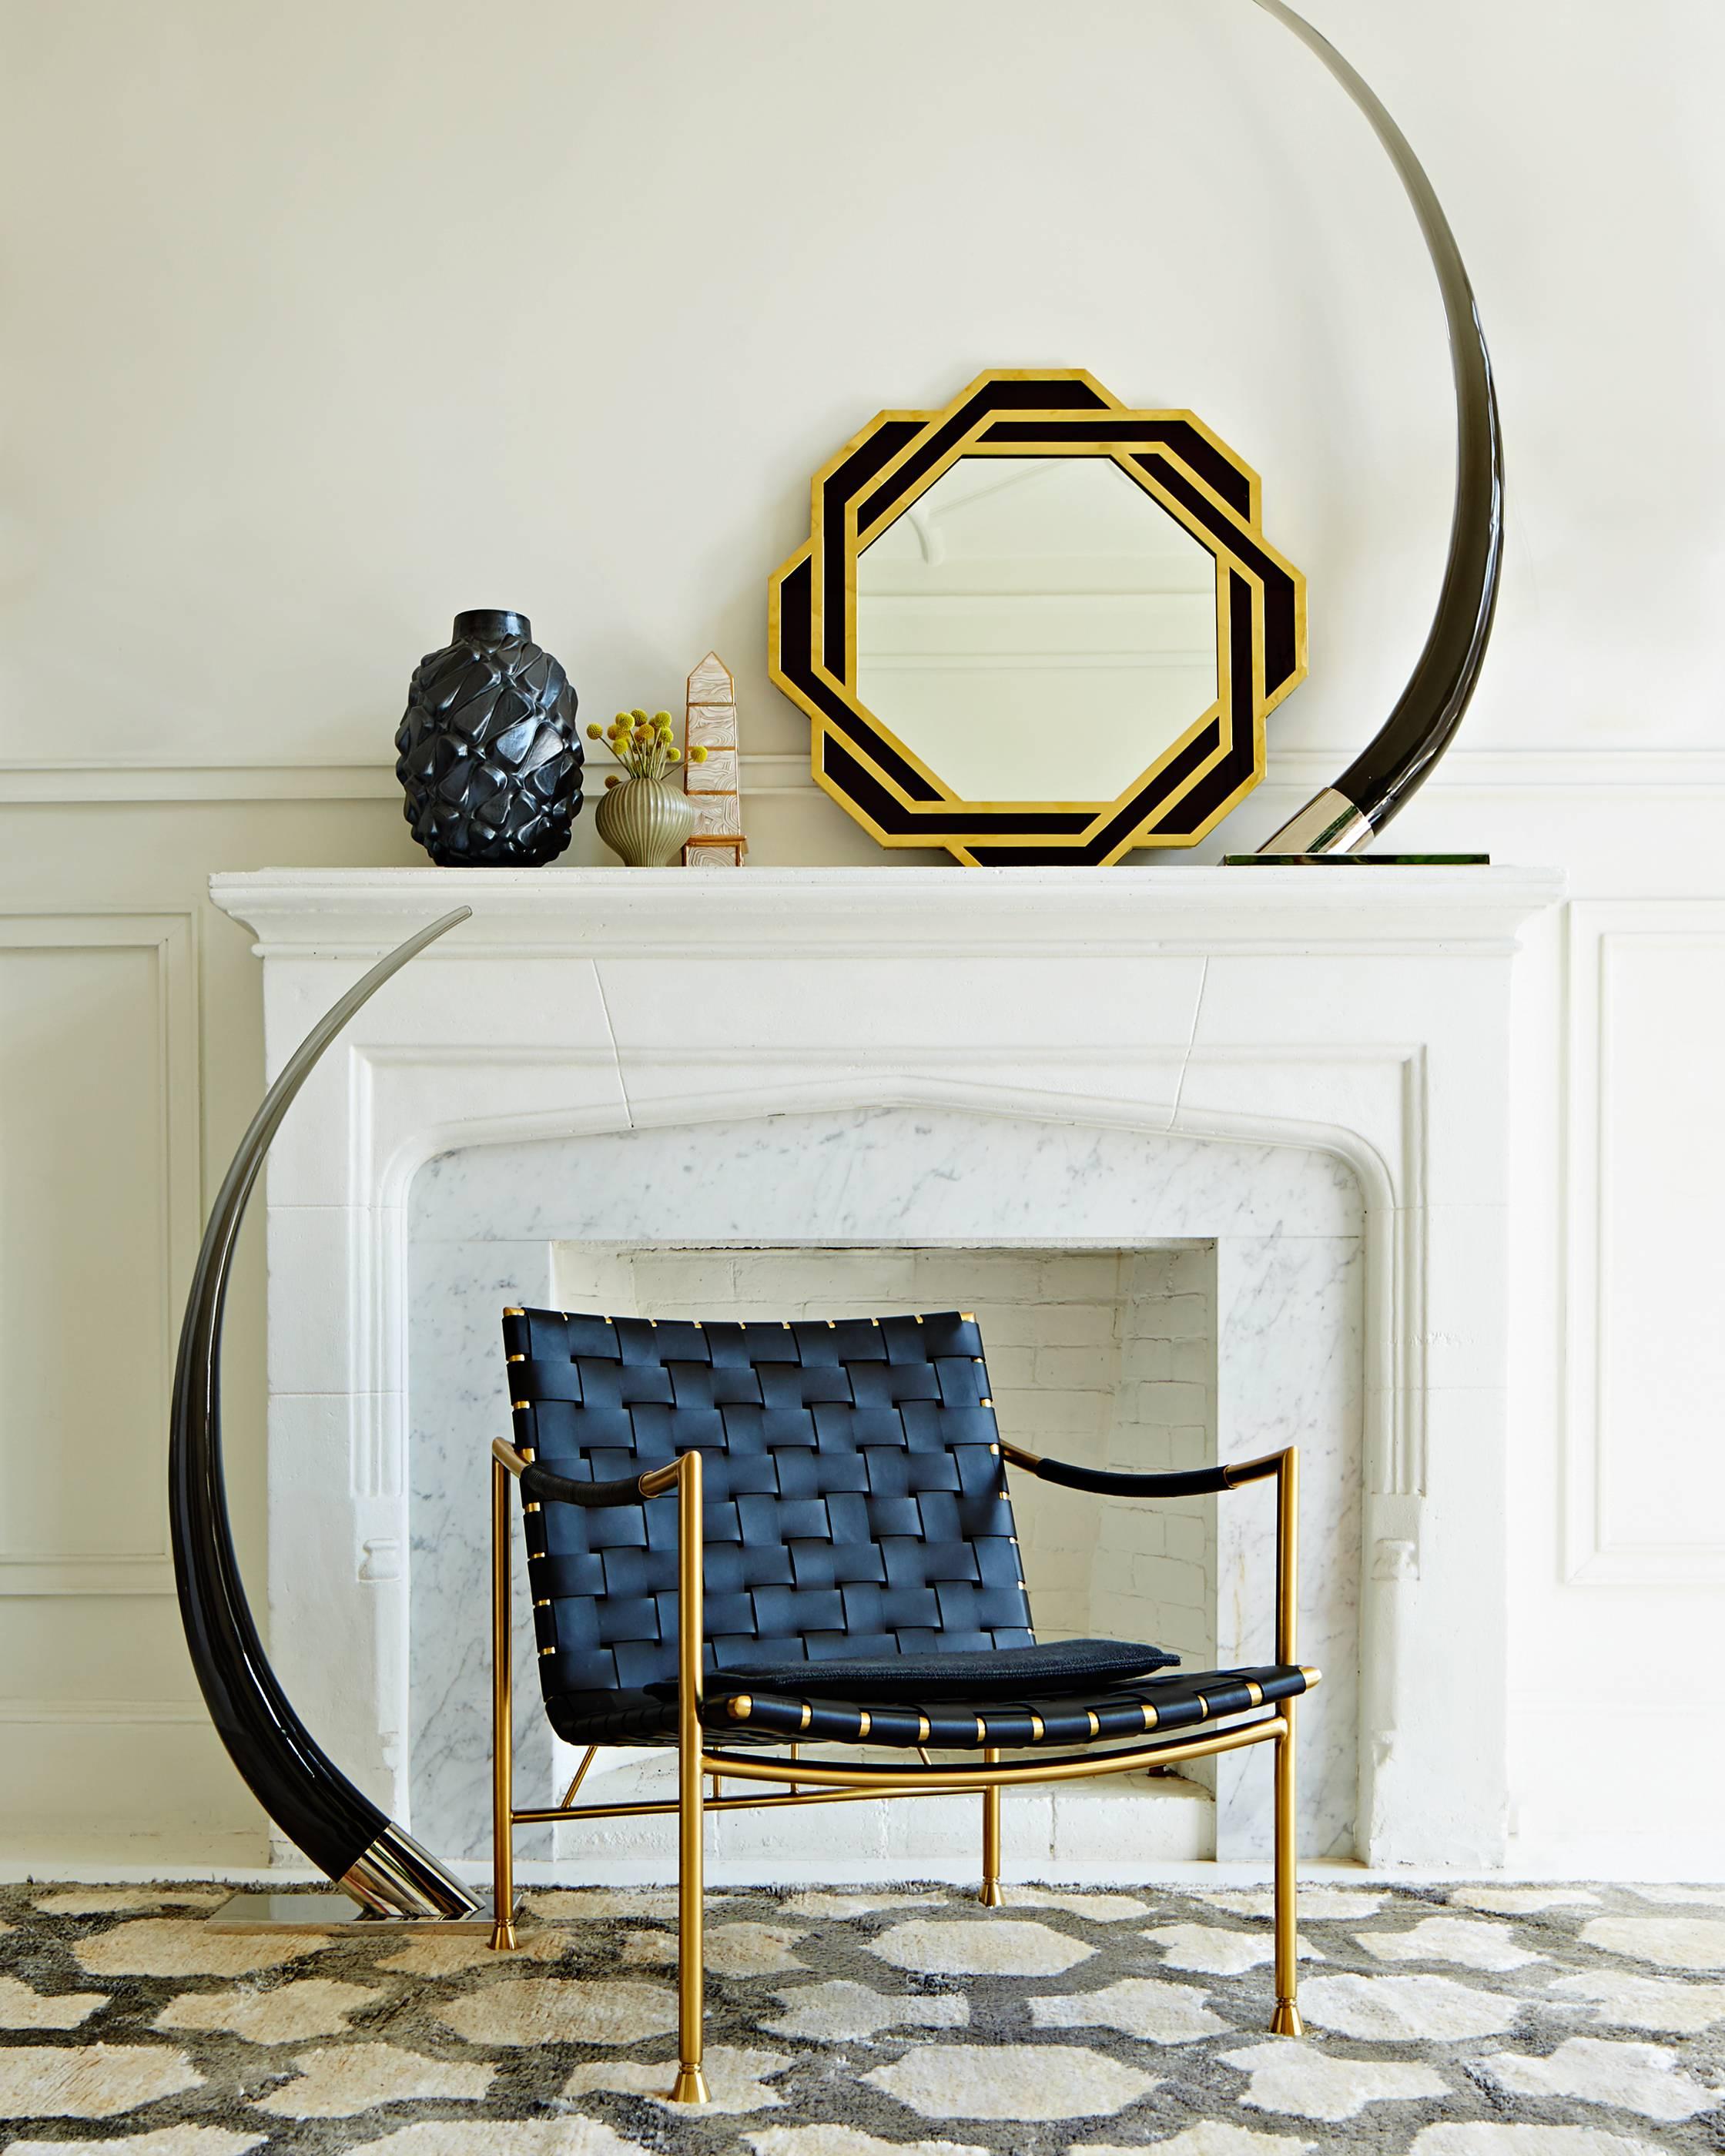 Haute horn. We've reinterpreted the decorating Classic the ornamental tusk—in moody smoked Lucite, set on a polished nickel mount. At 49 inches high, they look fab flanking a fireplace or adorning a credenza. Unleash your inner connoisseur with this